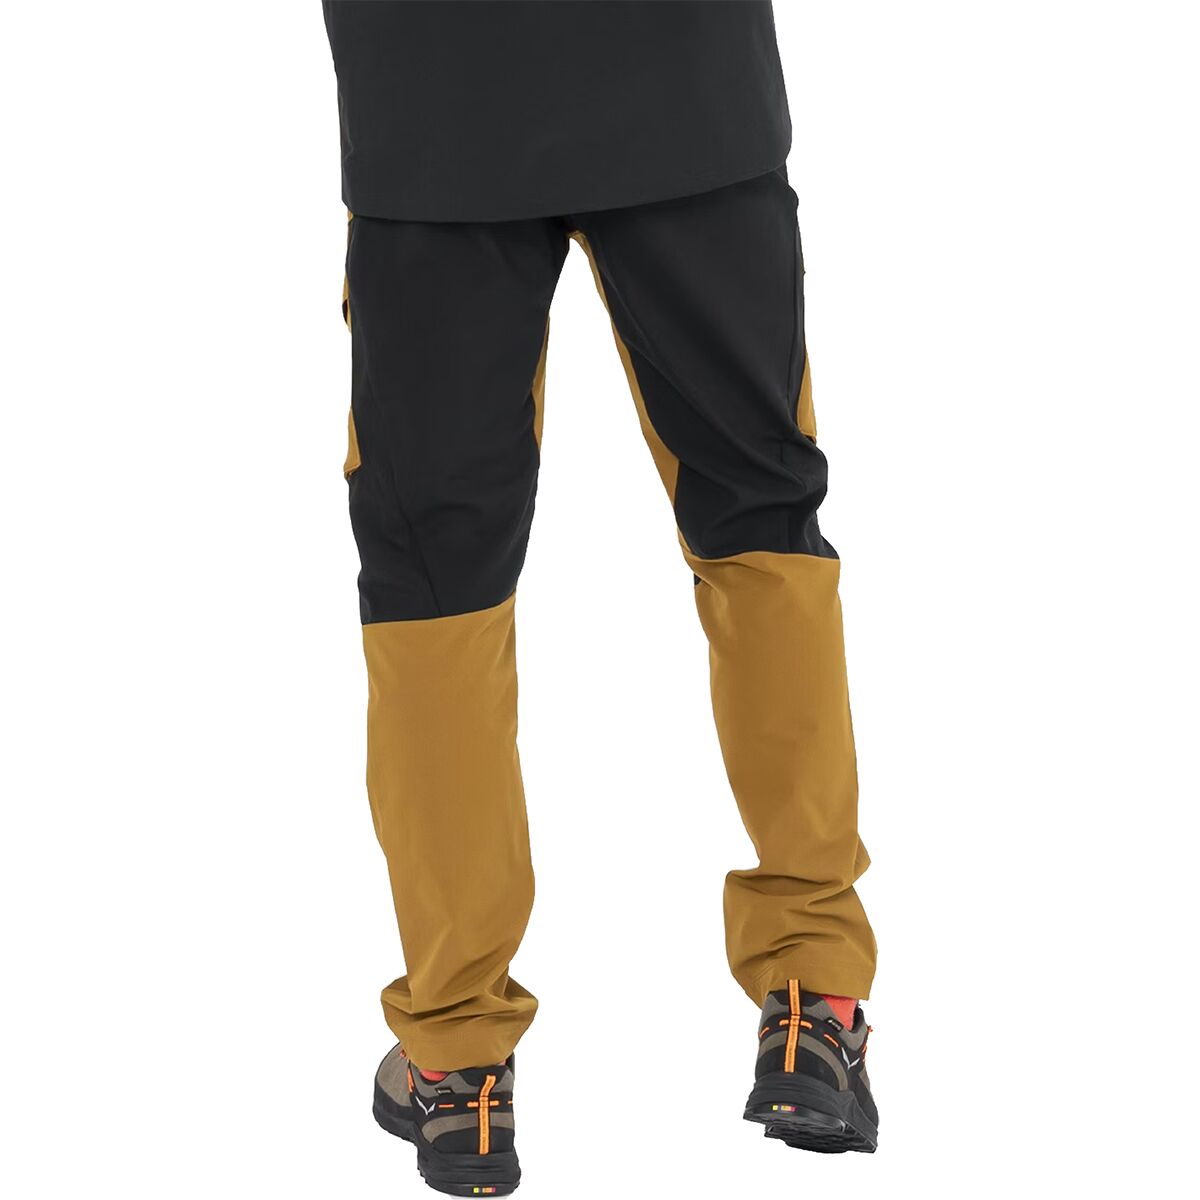 SALEWA-PUEZ DST CARGO PANT W GOLDEN BROWN - Hiking trousers